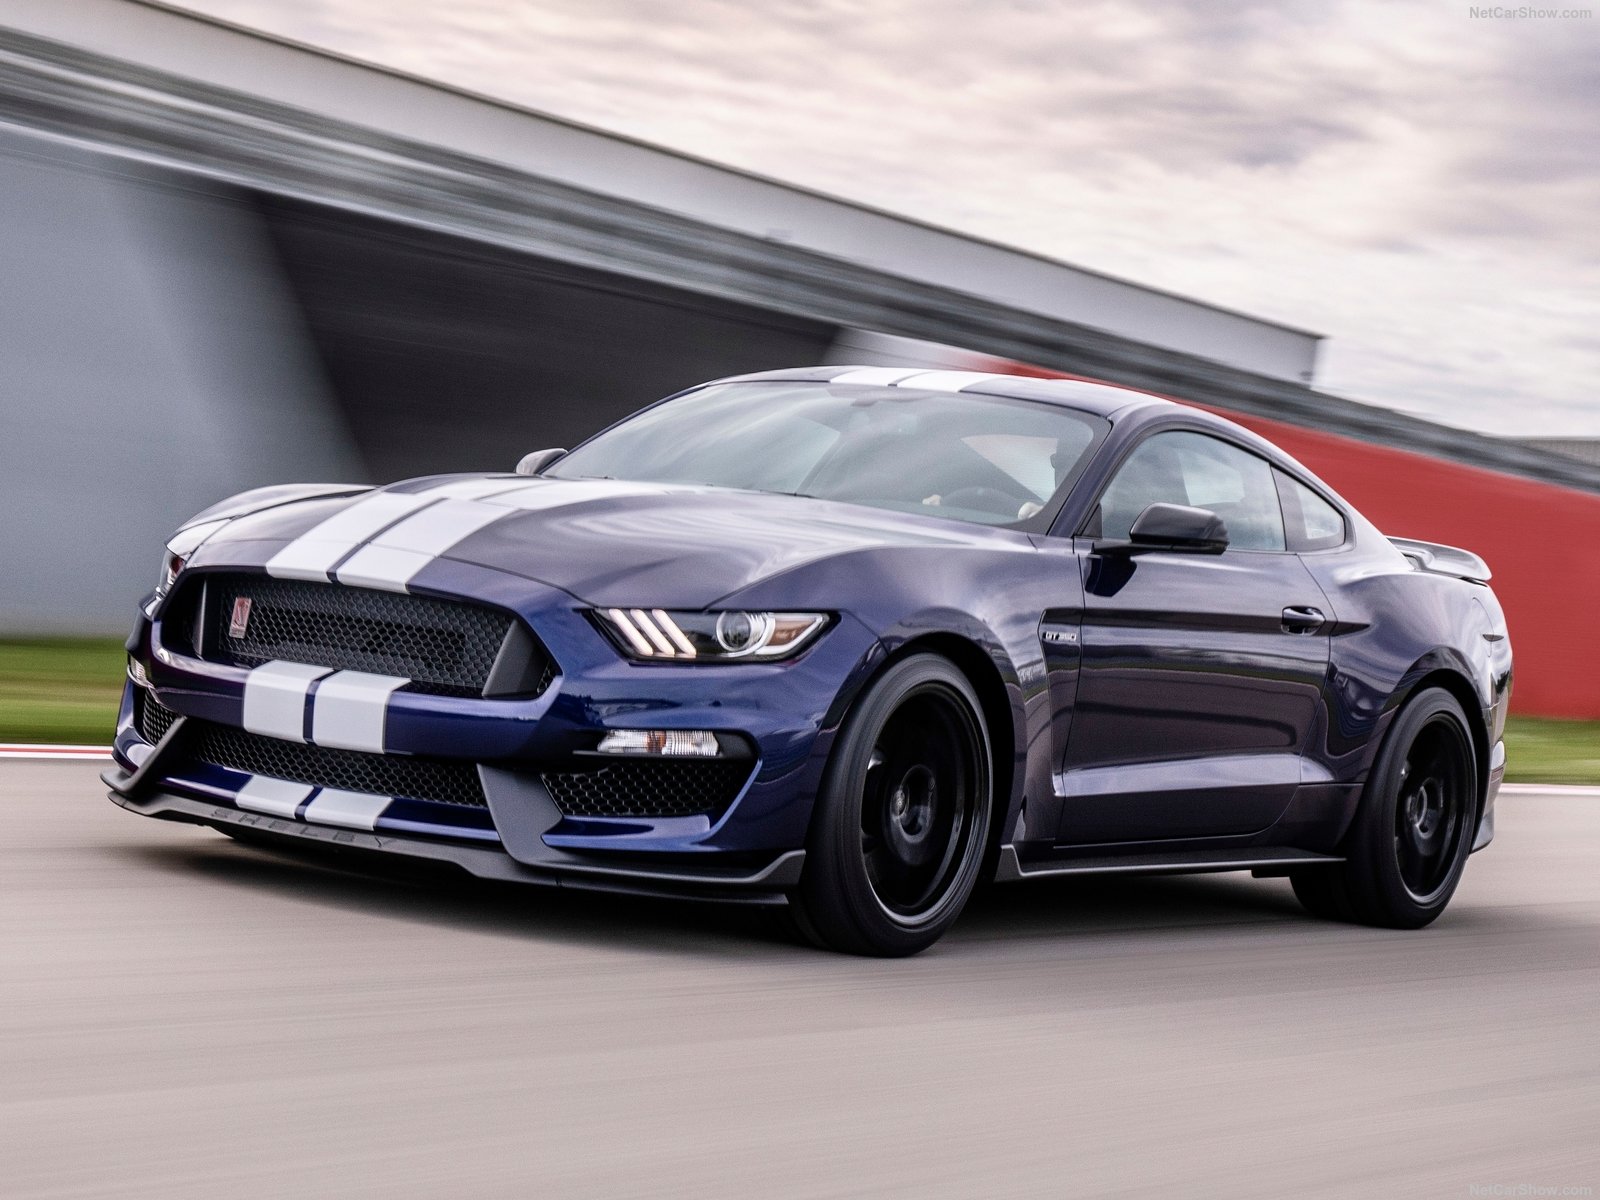 Ford Mustang Shelby GT350 Car Ford Mustang Shelby GT350 1600x1200